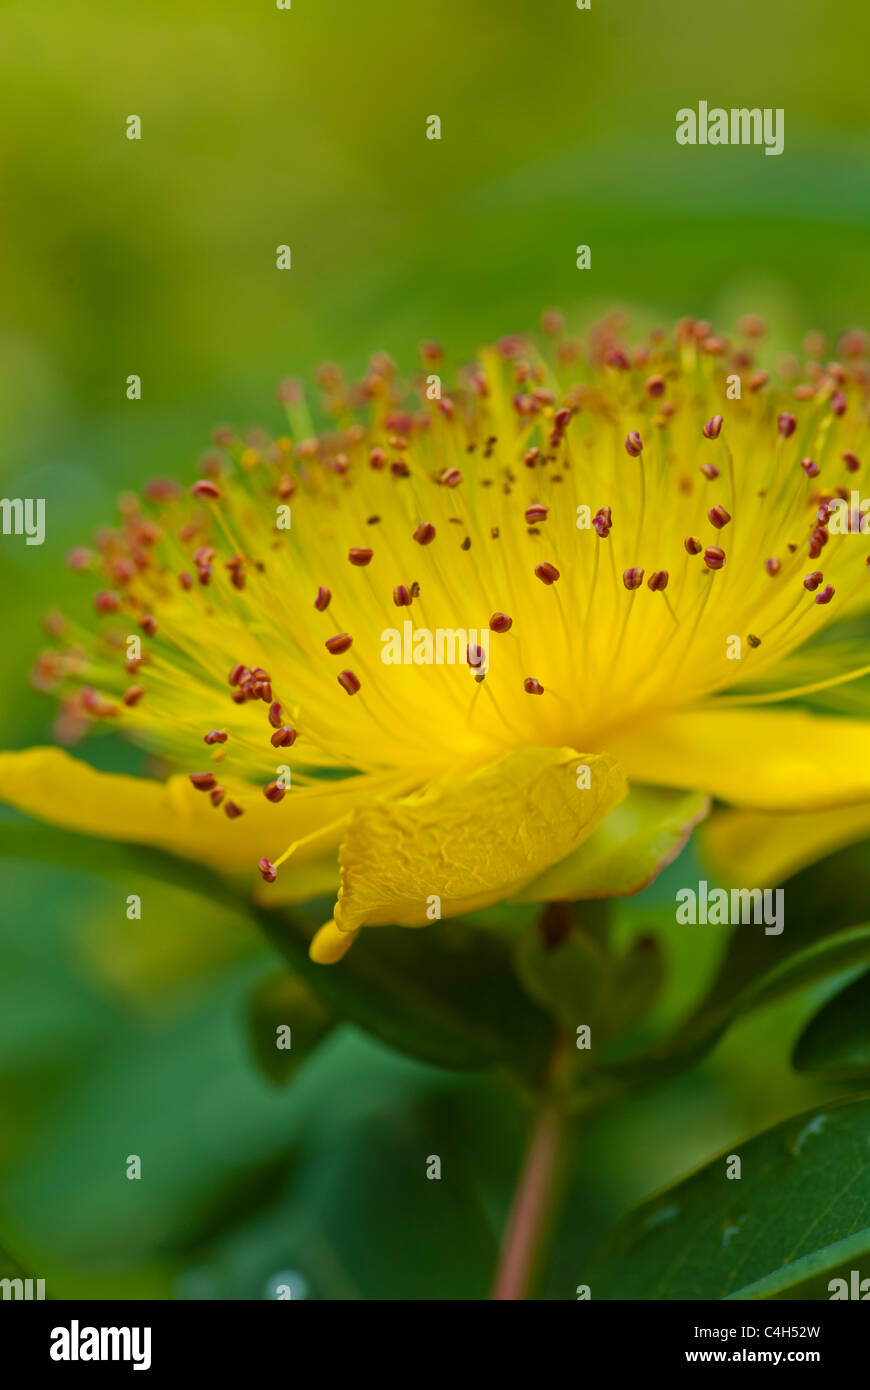 Close-up of blooming Hypericum Reptans (St John's Wort) flower, taken with depth of field Stock Photo